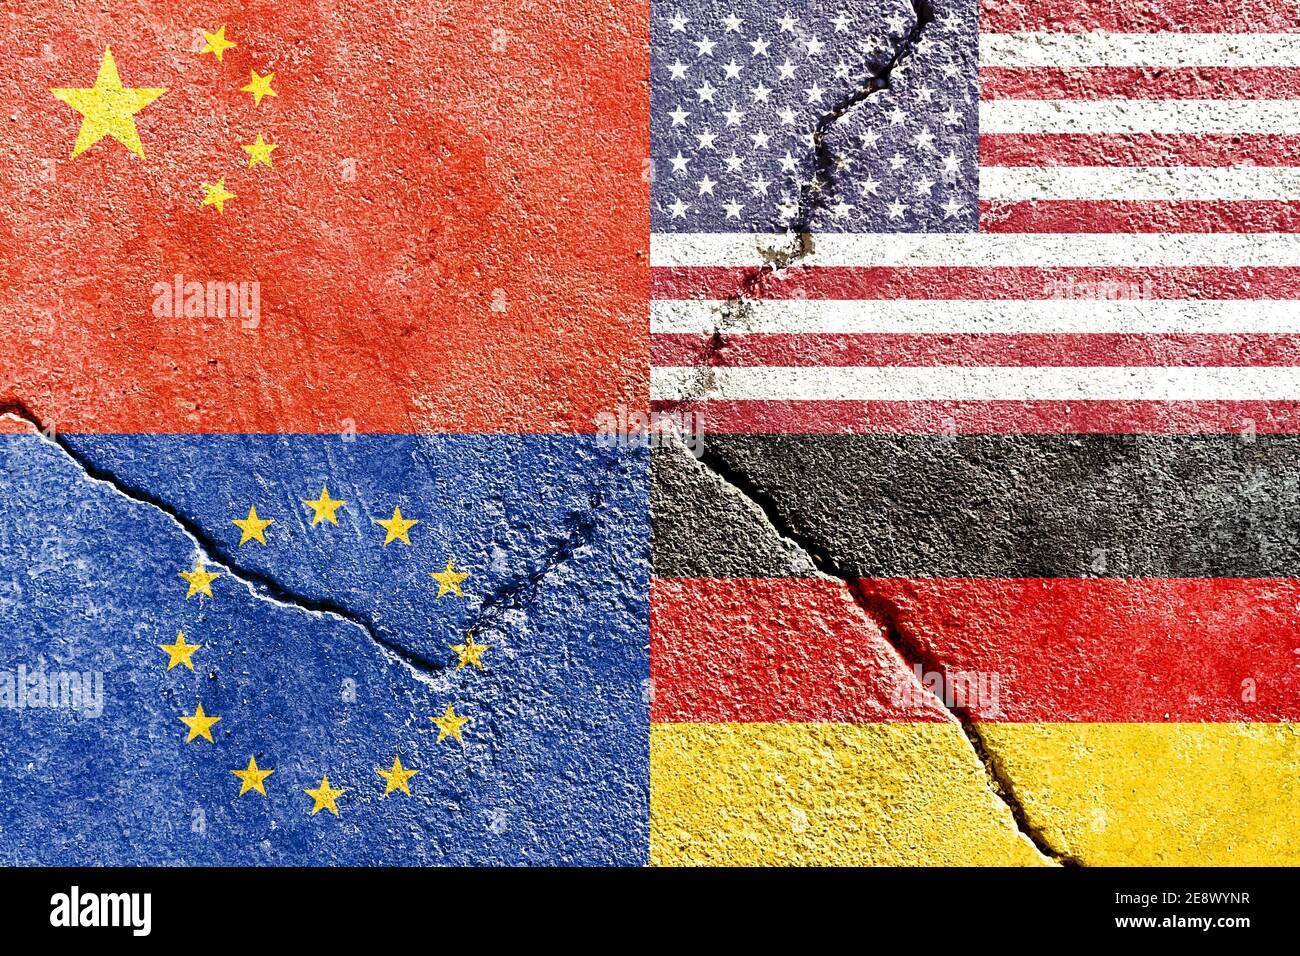 Closeup of USA, China, EU, and Germany flags on weathered and cracked wall background Stock Photo